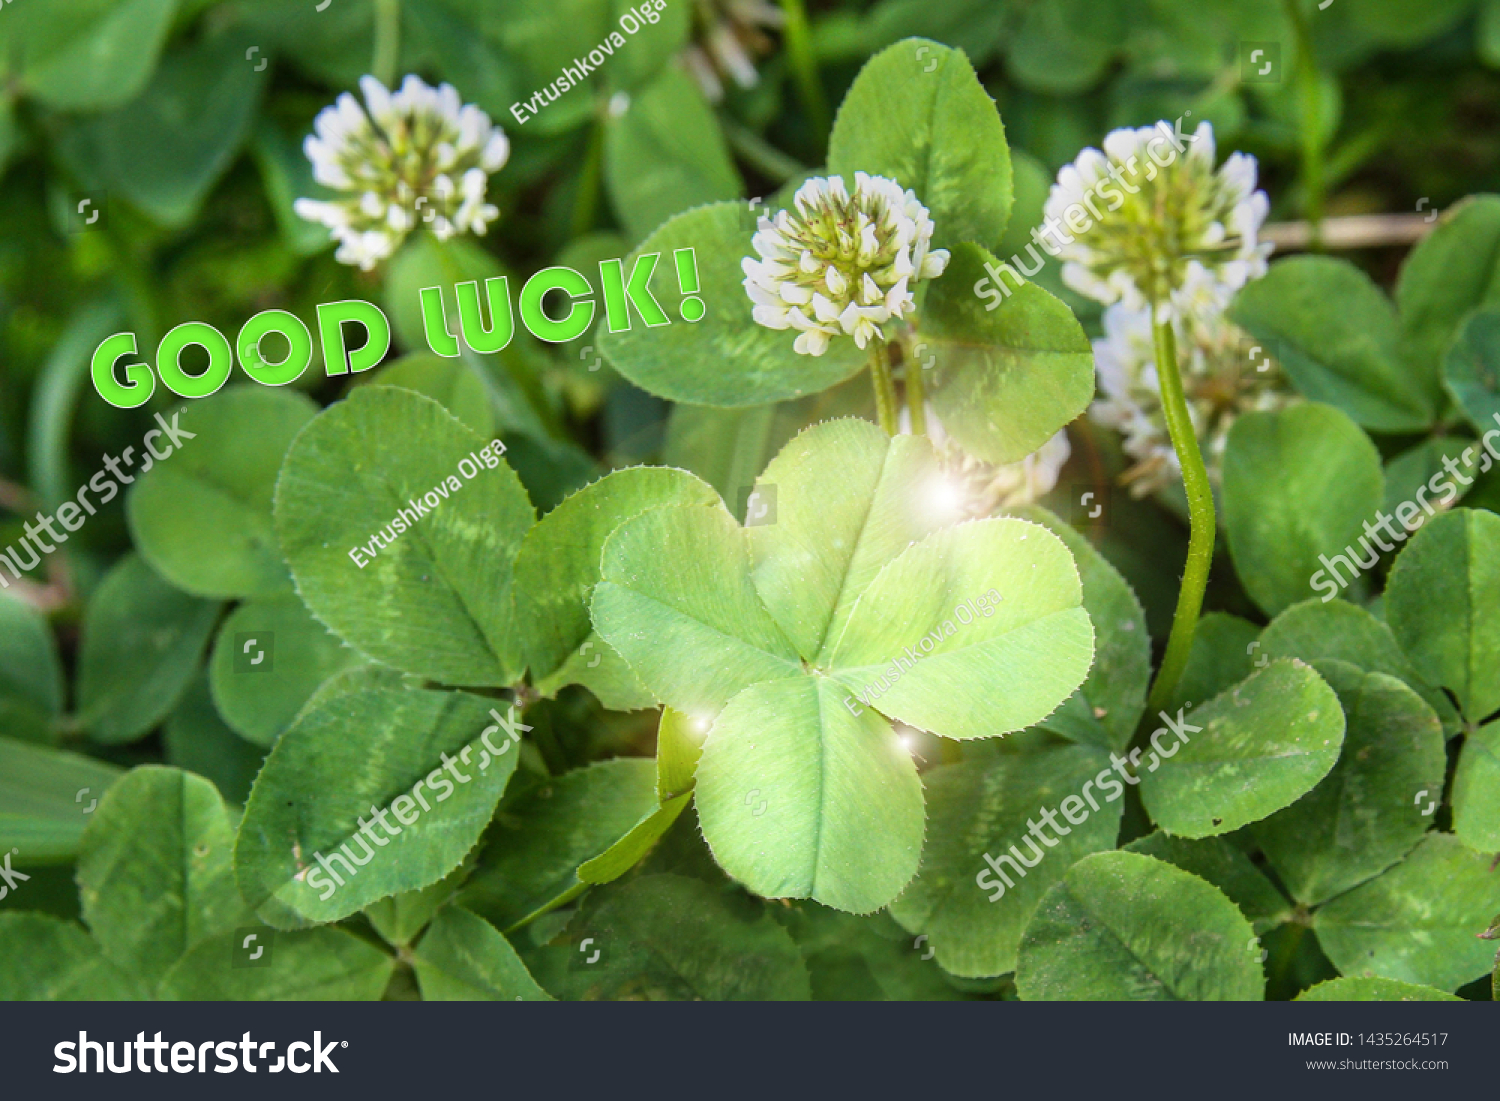 clover leaf with four leaves for good luck #1435264517